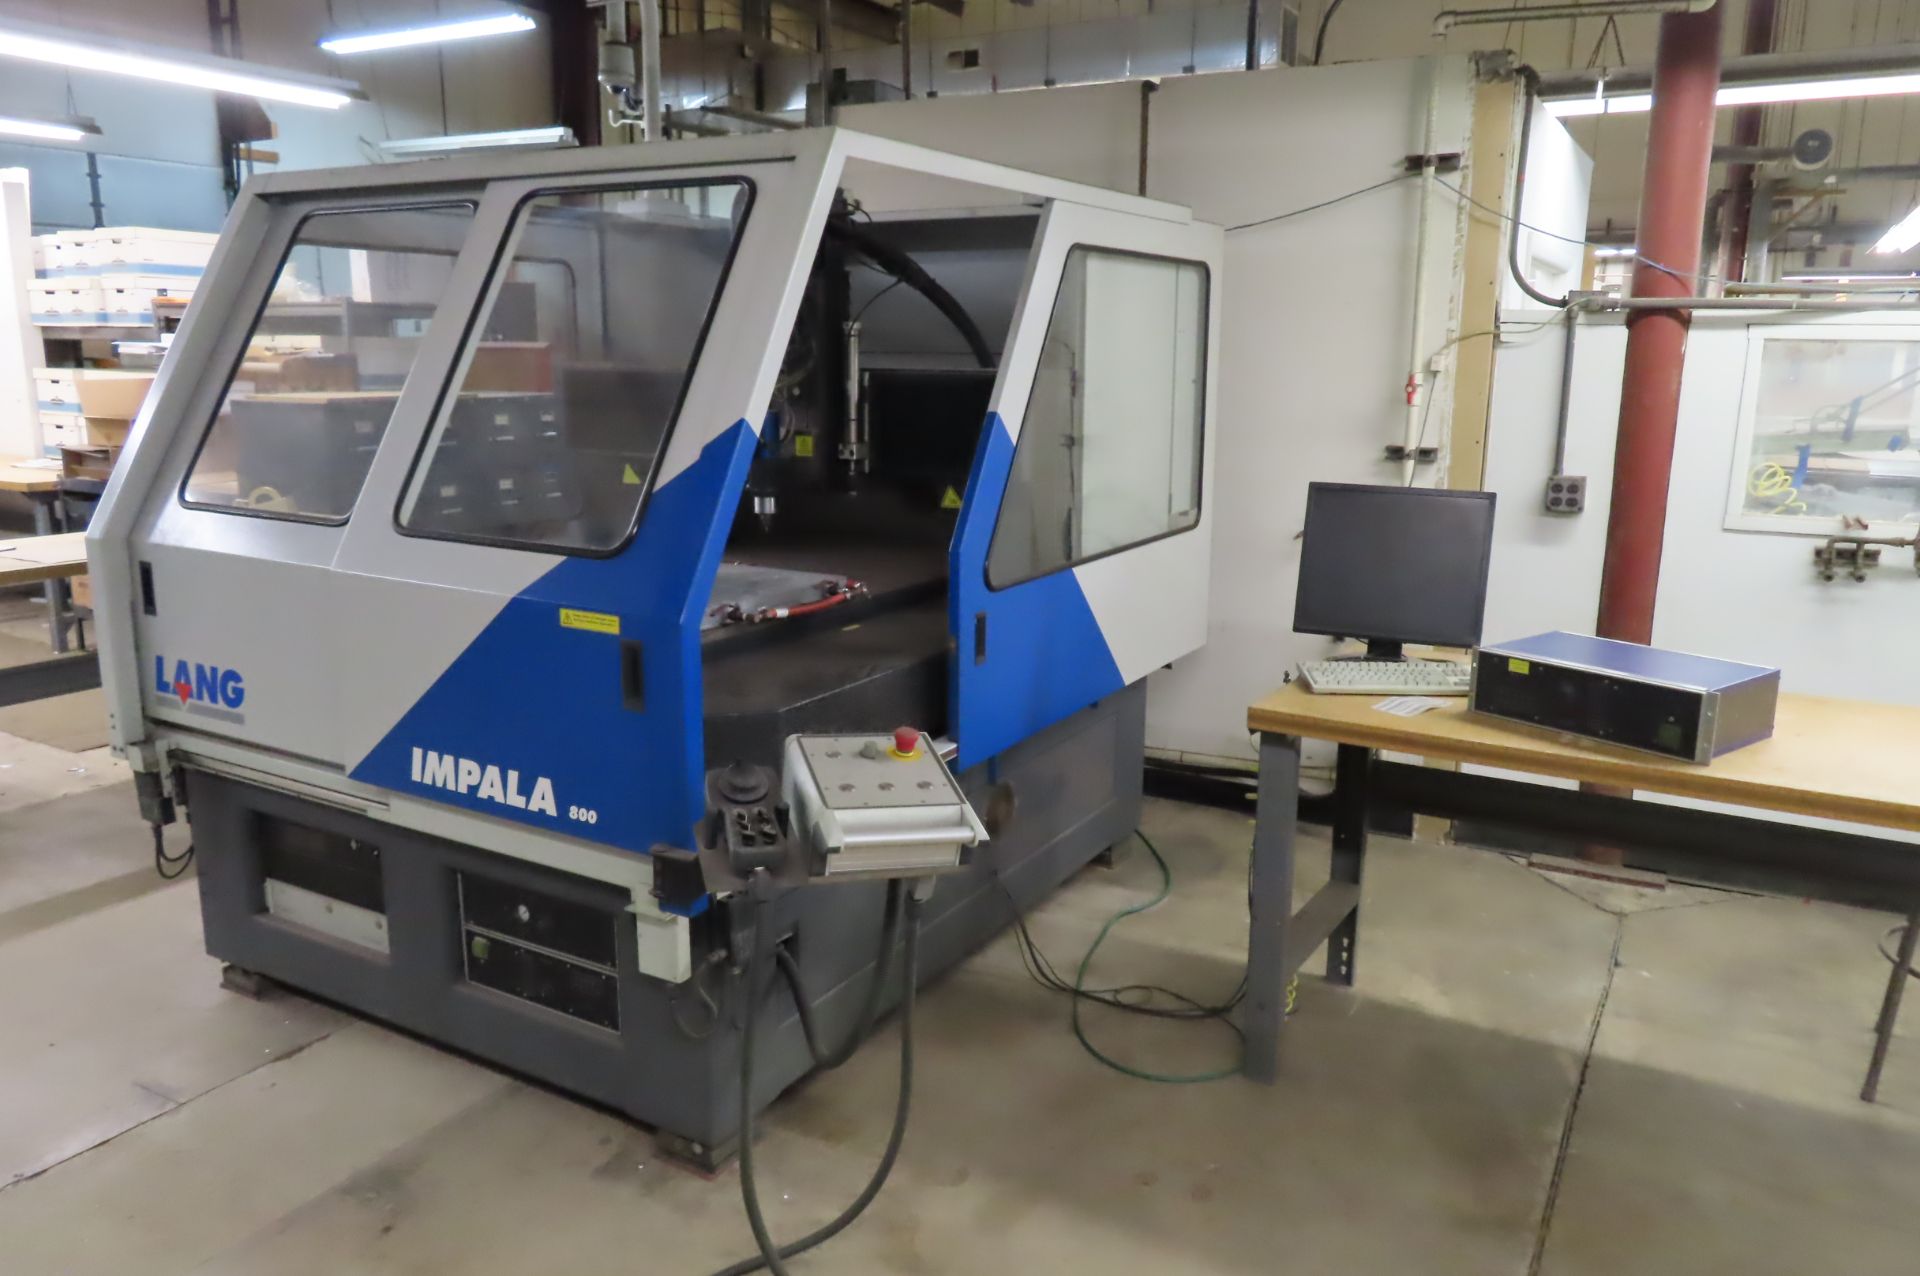 2007 LANG IMPALA 800 CNC ENGRAVING AND MILLING MACHINE, S/N 0709-H530-58, 3 AXIS, X-31 IN... - Image 7 of 16